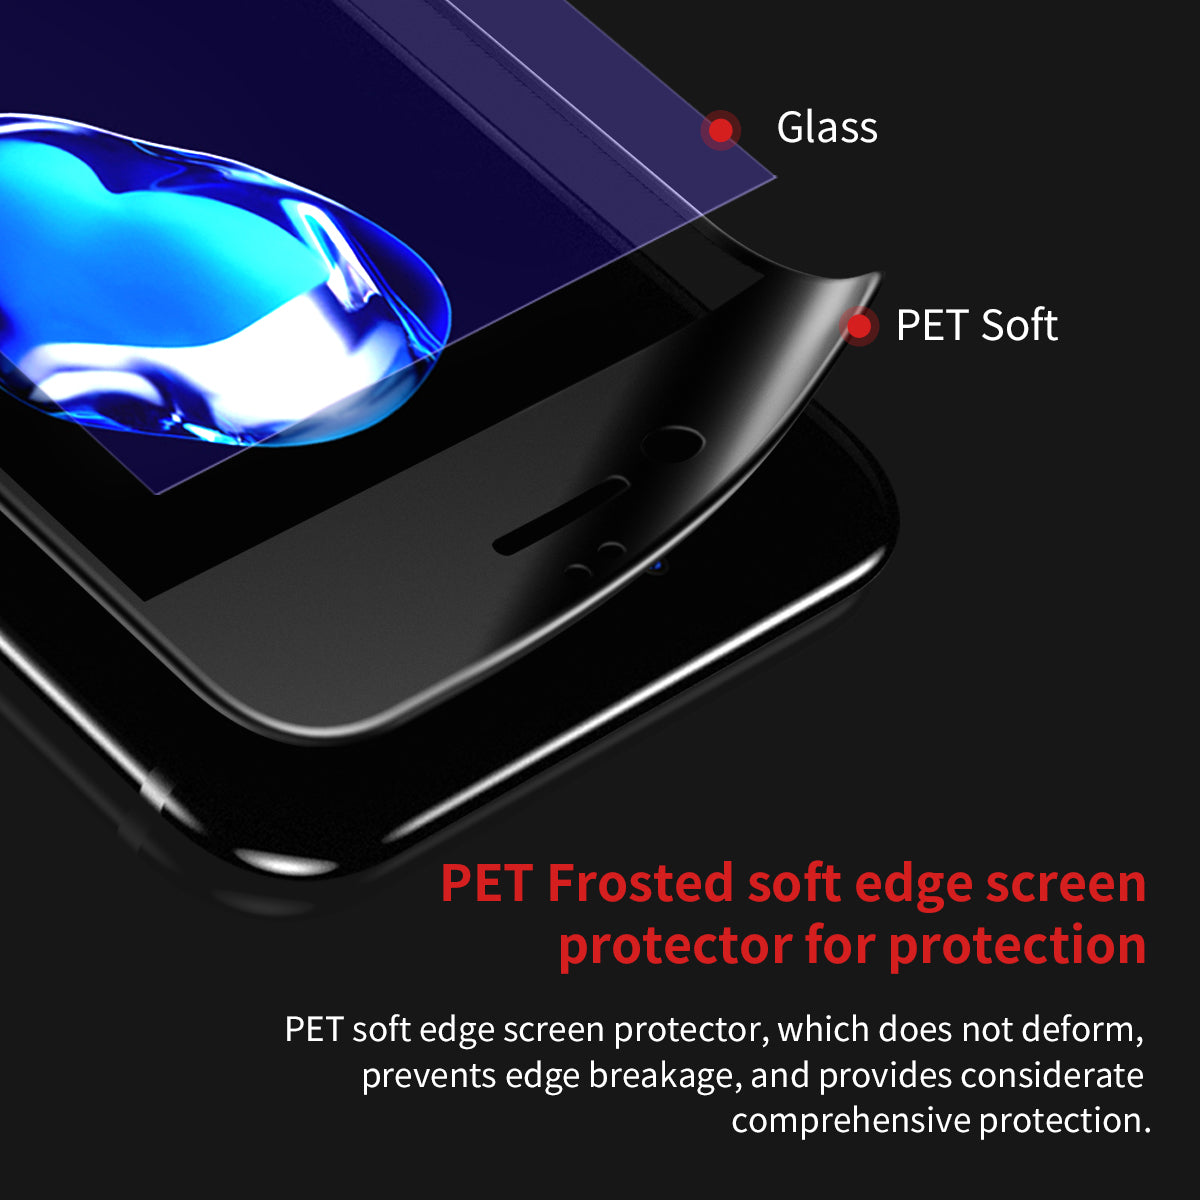 Premium Screen Protector Tempered Glass For iPhone 8 7 3D Frosted Protection Full Cover Glass Film For iPhone 8 7 Plus - Flickdeal.co.nz